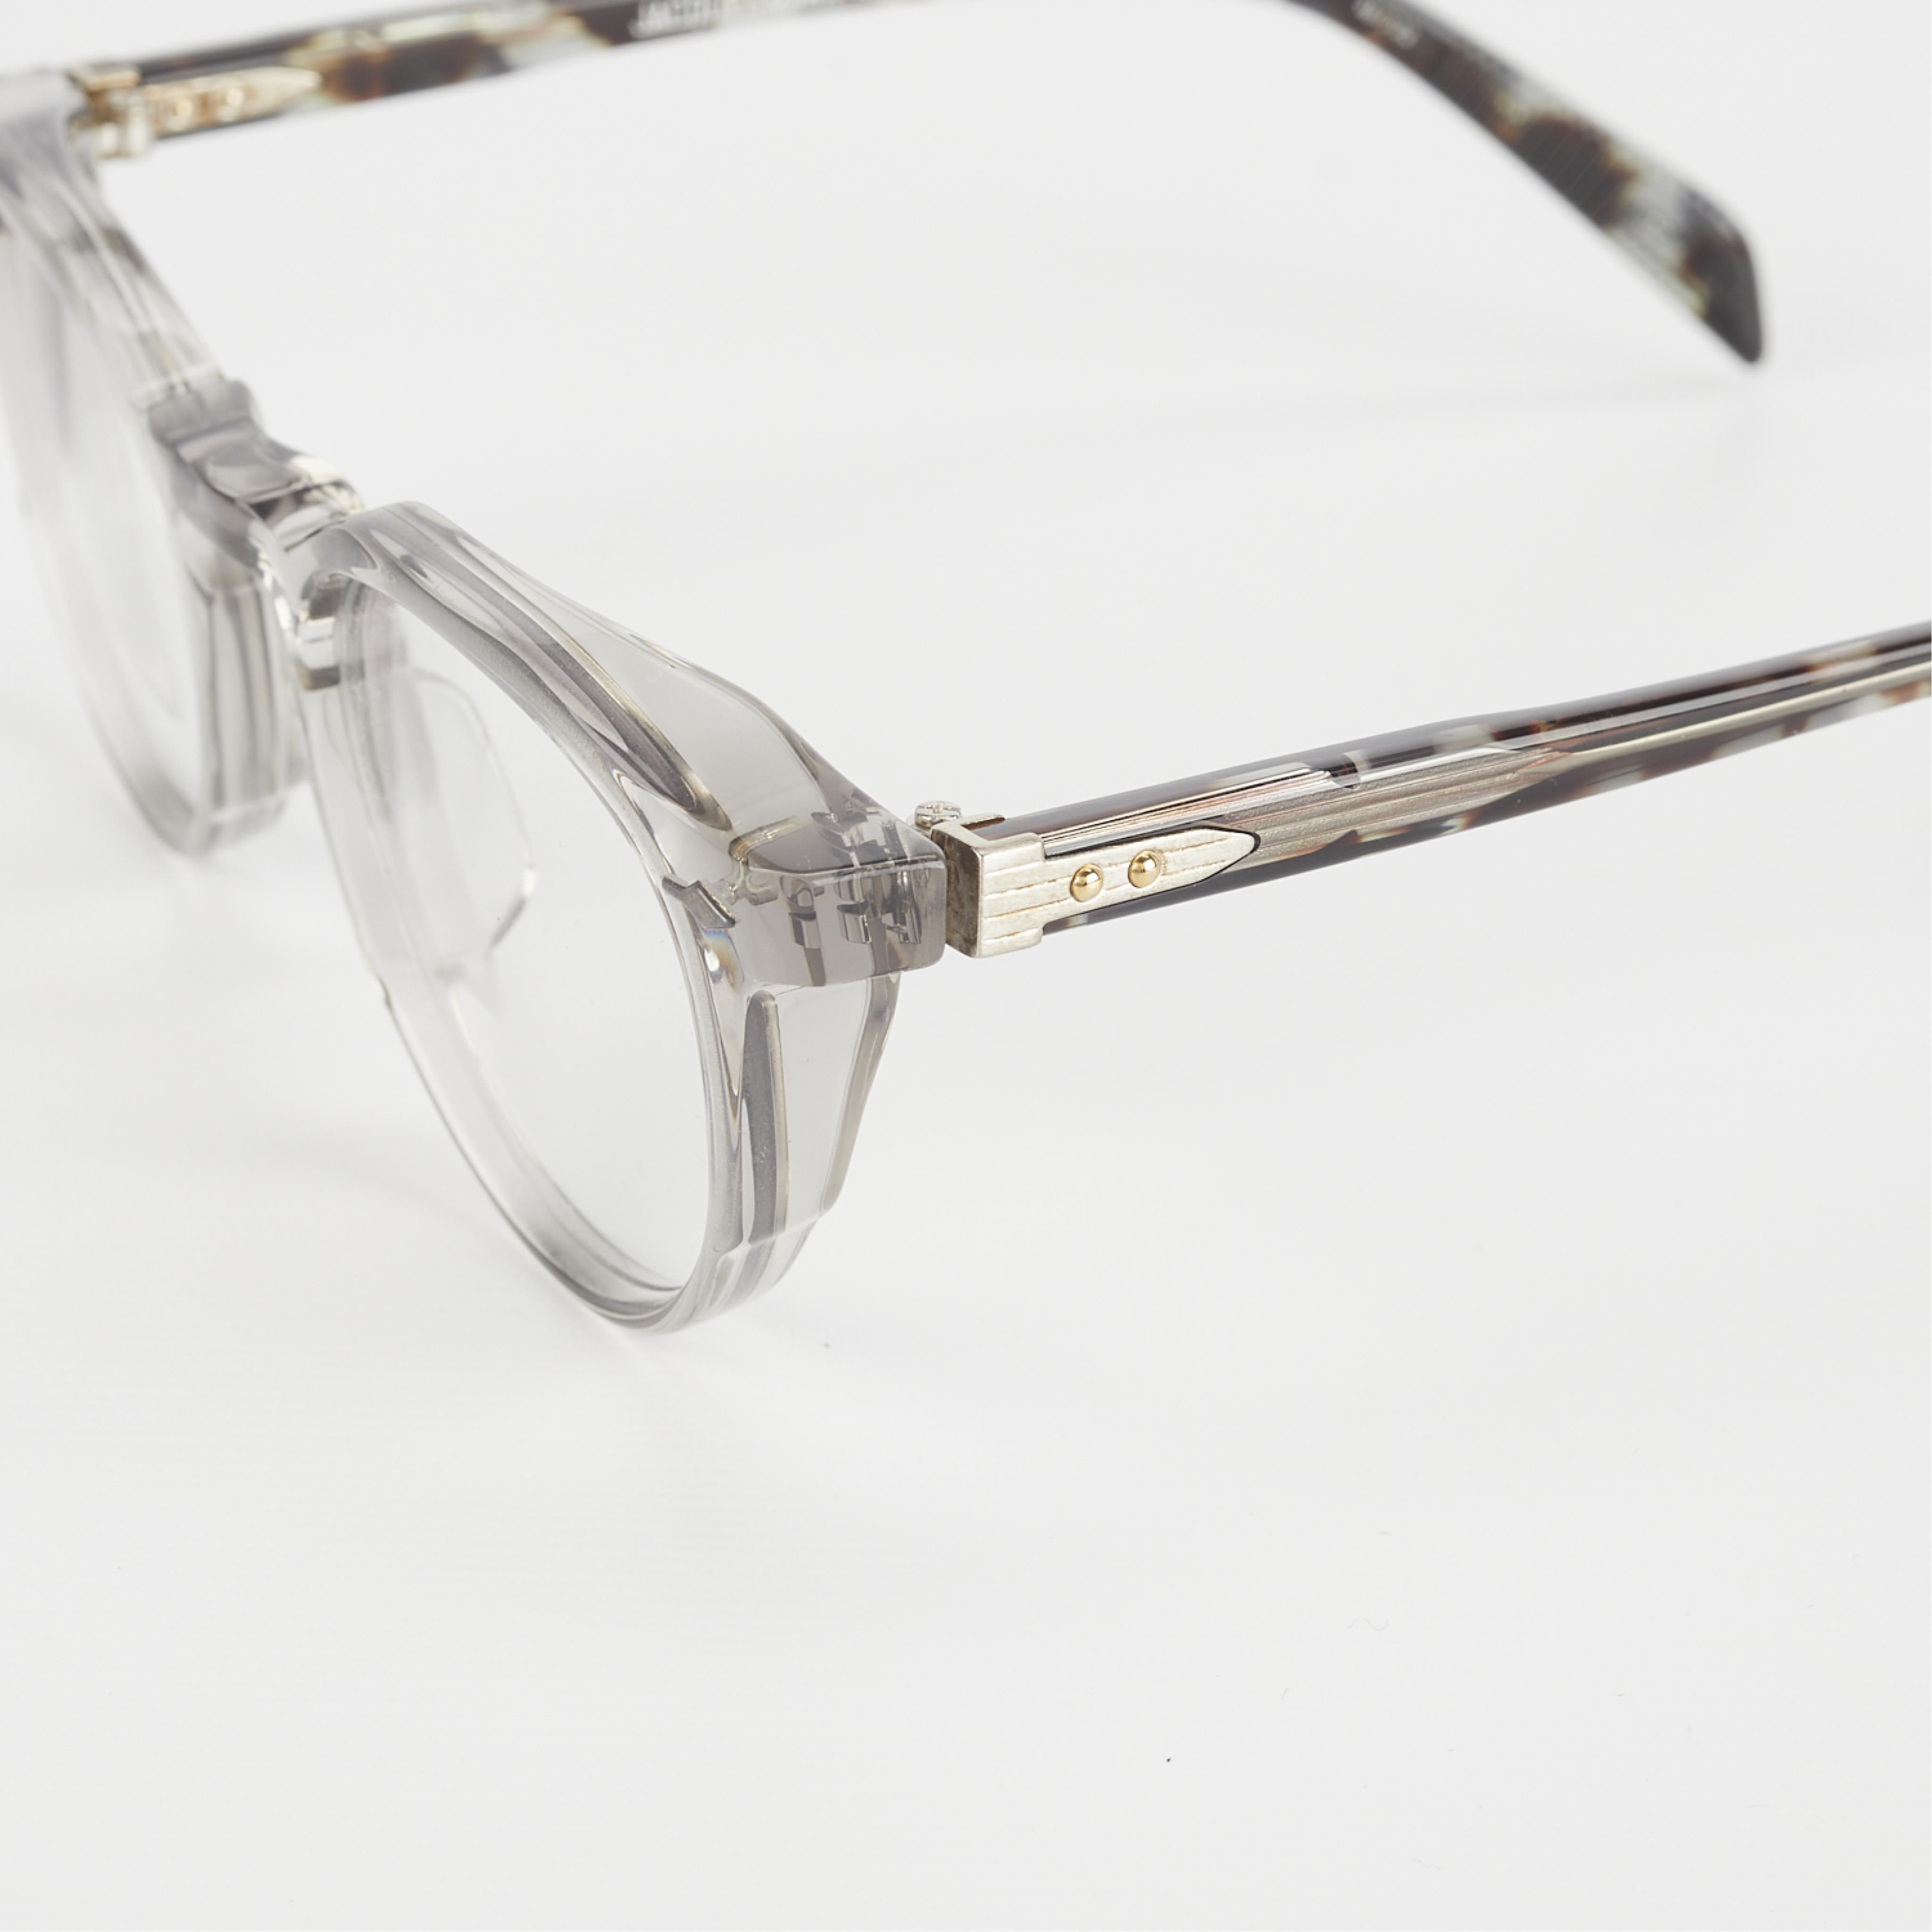 Grp 2 Jacques Marie Mage Eyeglasses - Image 16 of 18